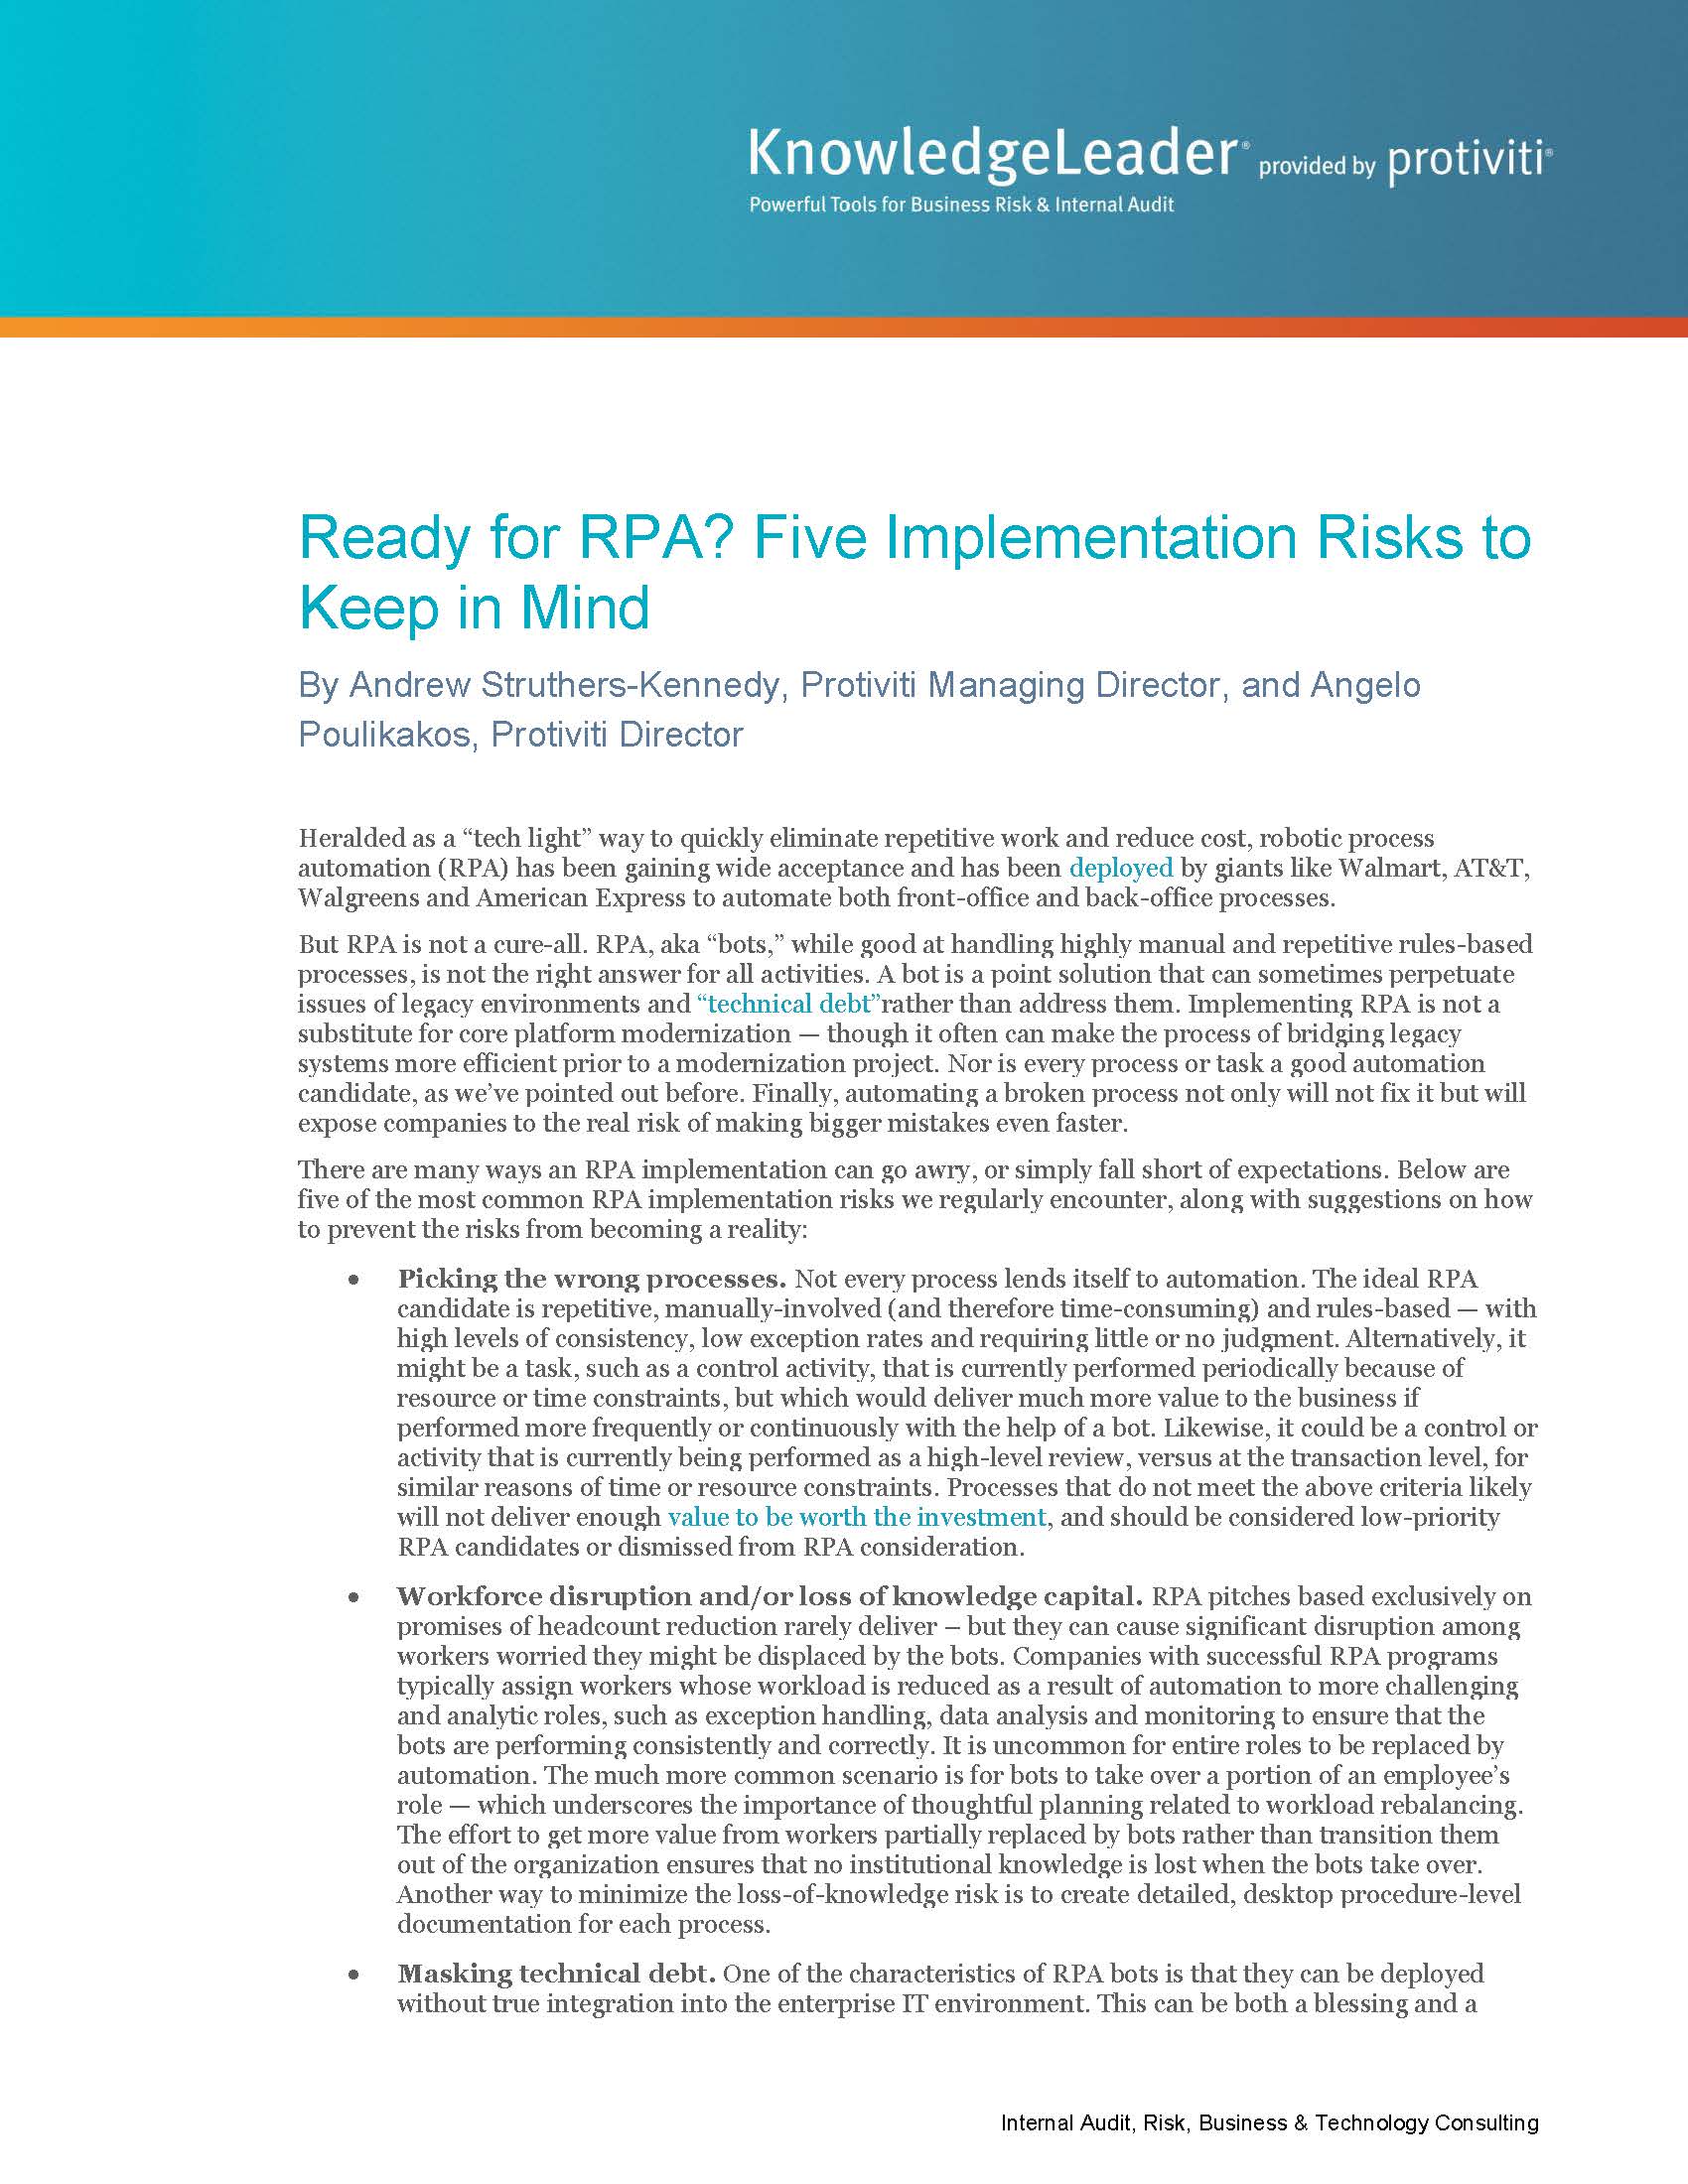 Screenshot of the first page of Ready for RPA Five Implementation Risks to Keep in Mind